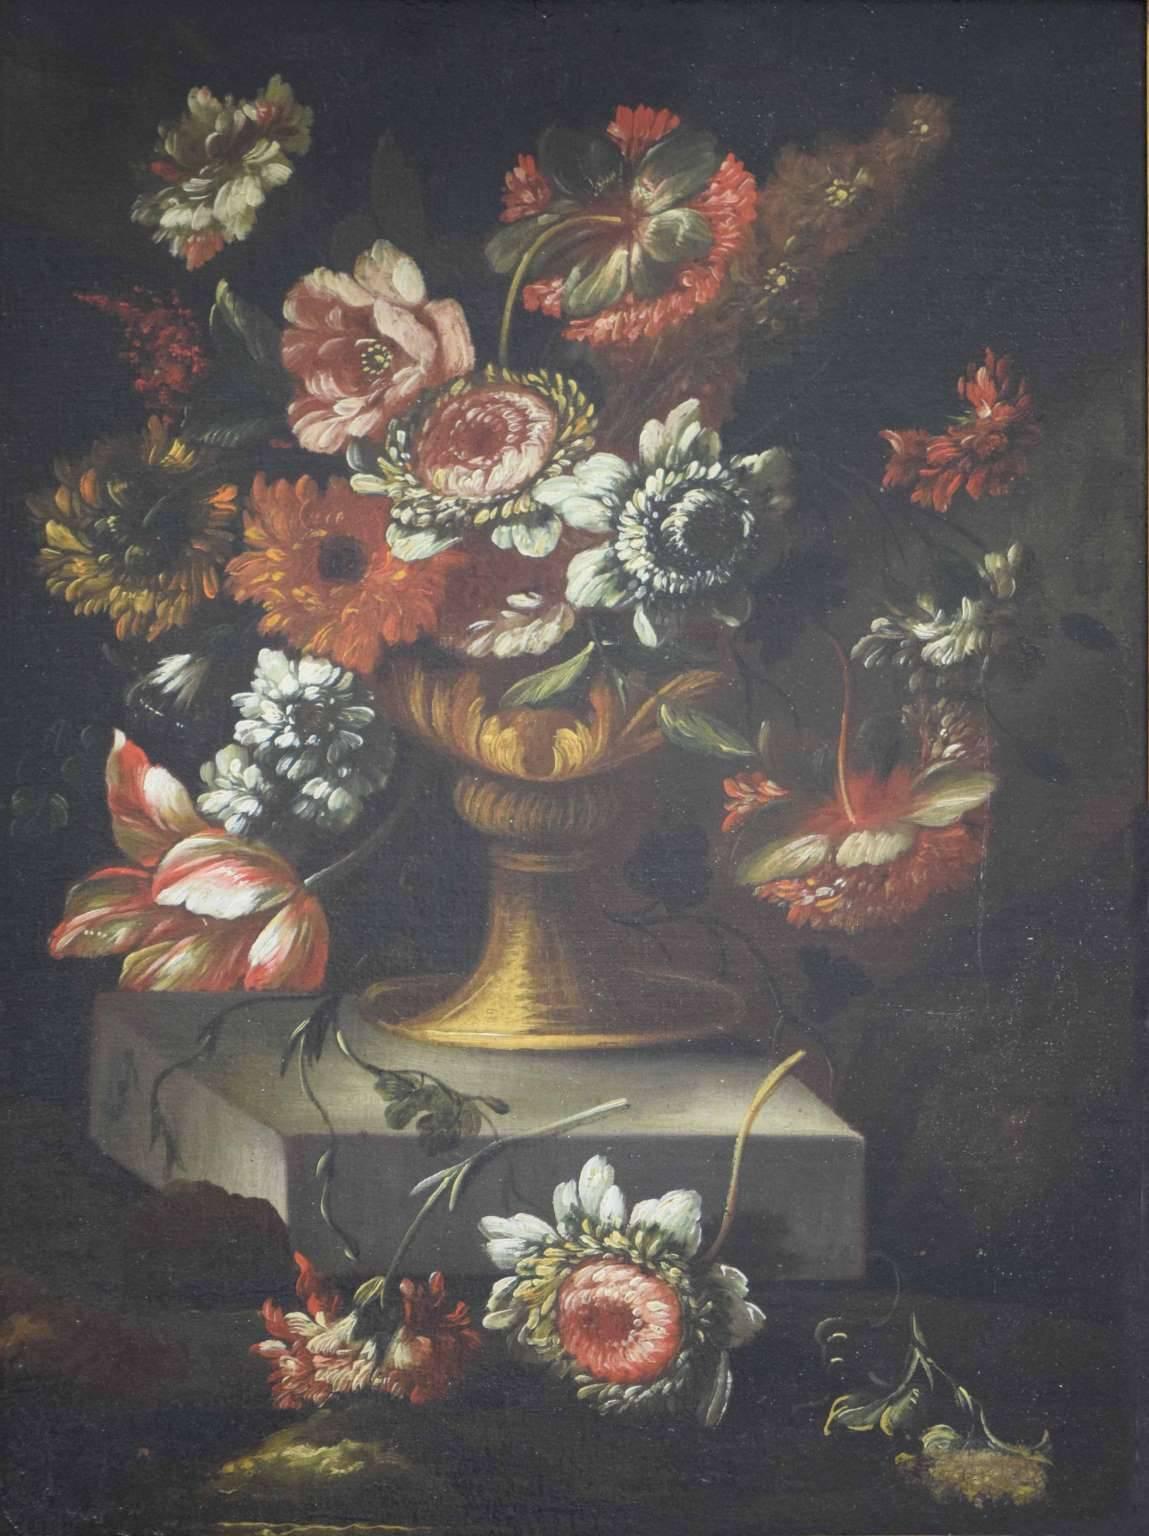 Flemish 18th century still life paintings each depicting an urn filled with a profusion of summer flowers tin include: Dutch tulip sulphur rose, peony, iris, meadowsweet, opium poppy, rhododendron, stock, heather, etc. both overflowing onto a ledge